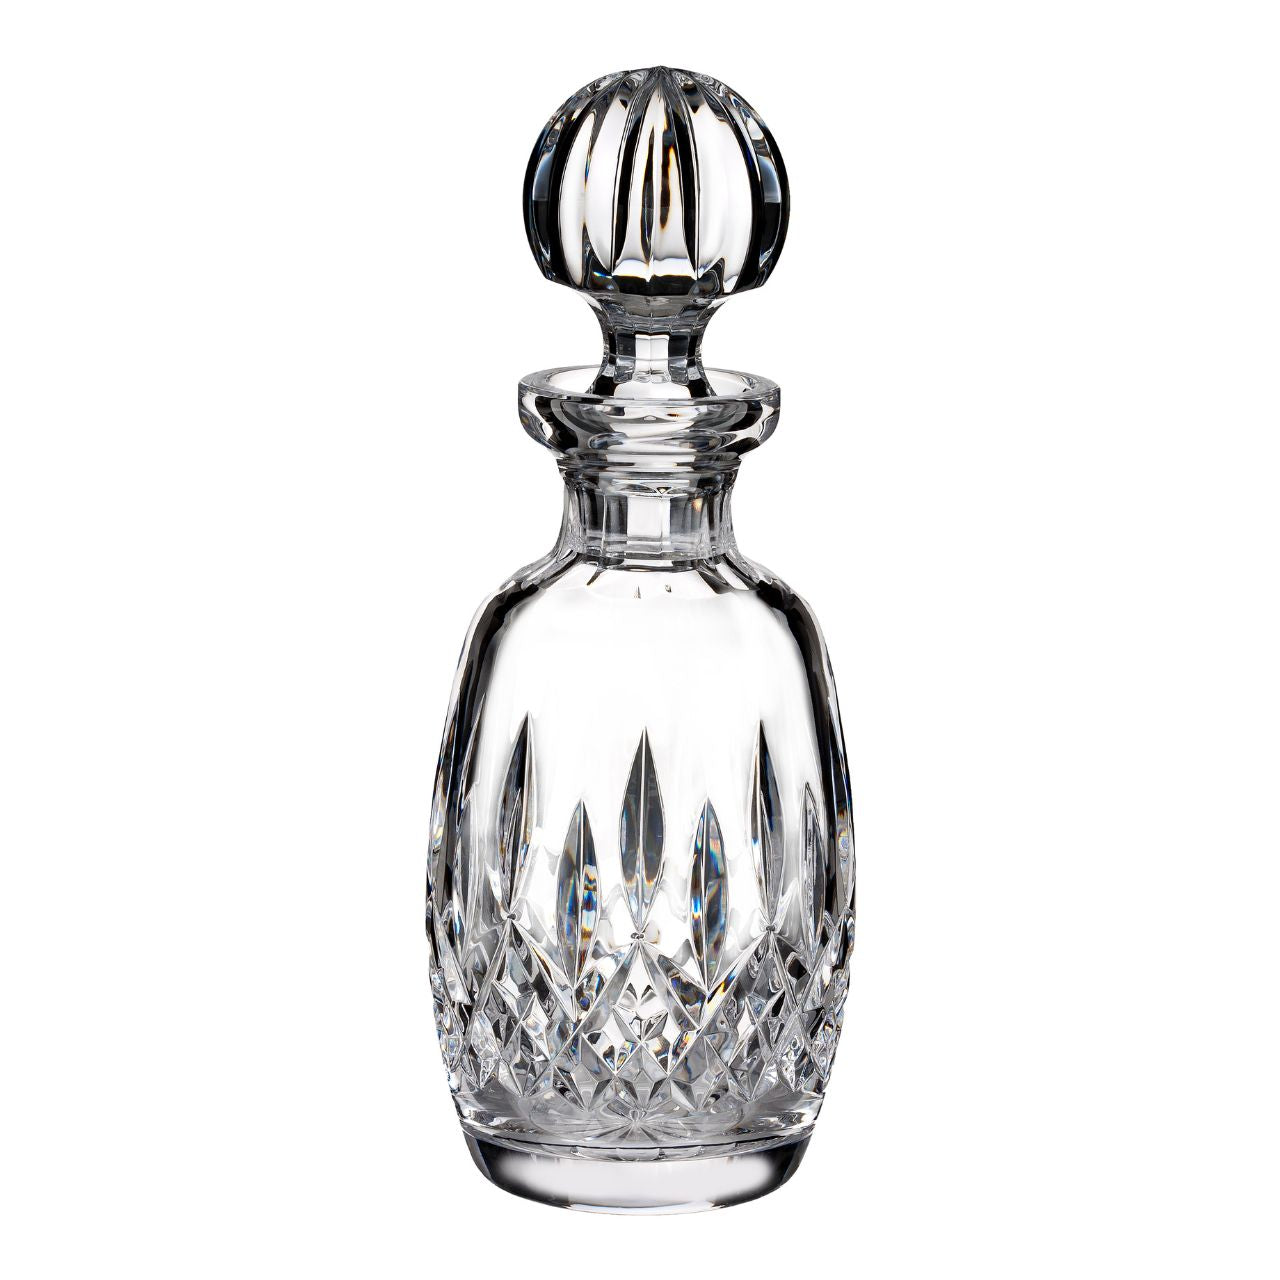 Waterford Crystal Lismore Connoisseur Rounded Decanter  Aerate your finest wine in style with this striking Lismore Nouveau Decanting Carafe. This eye-catching crystal carafe is expertly crafted for stunning form and function. The wide bowl is specially designed to expose decanted wine to oxygen by maximising the surface area, whilst its slender neck and reassuringly weighted base are crafted for flawless practicality and easy pouring.